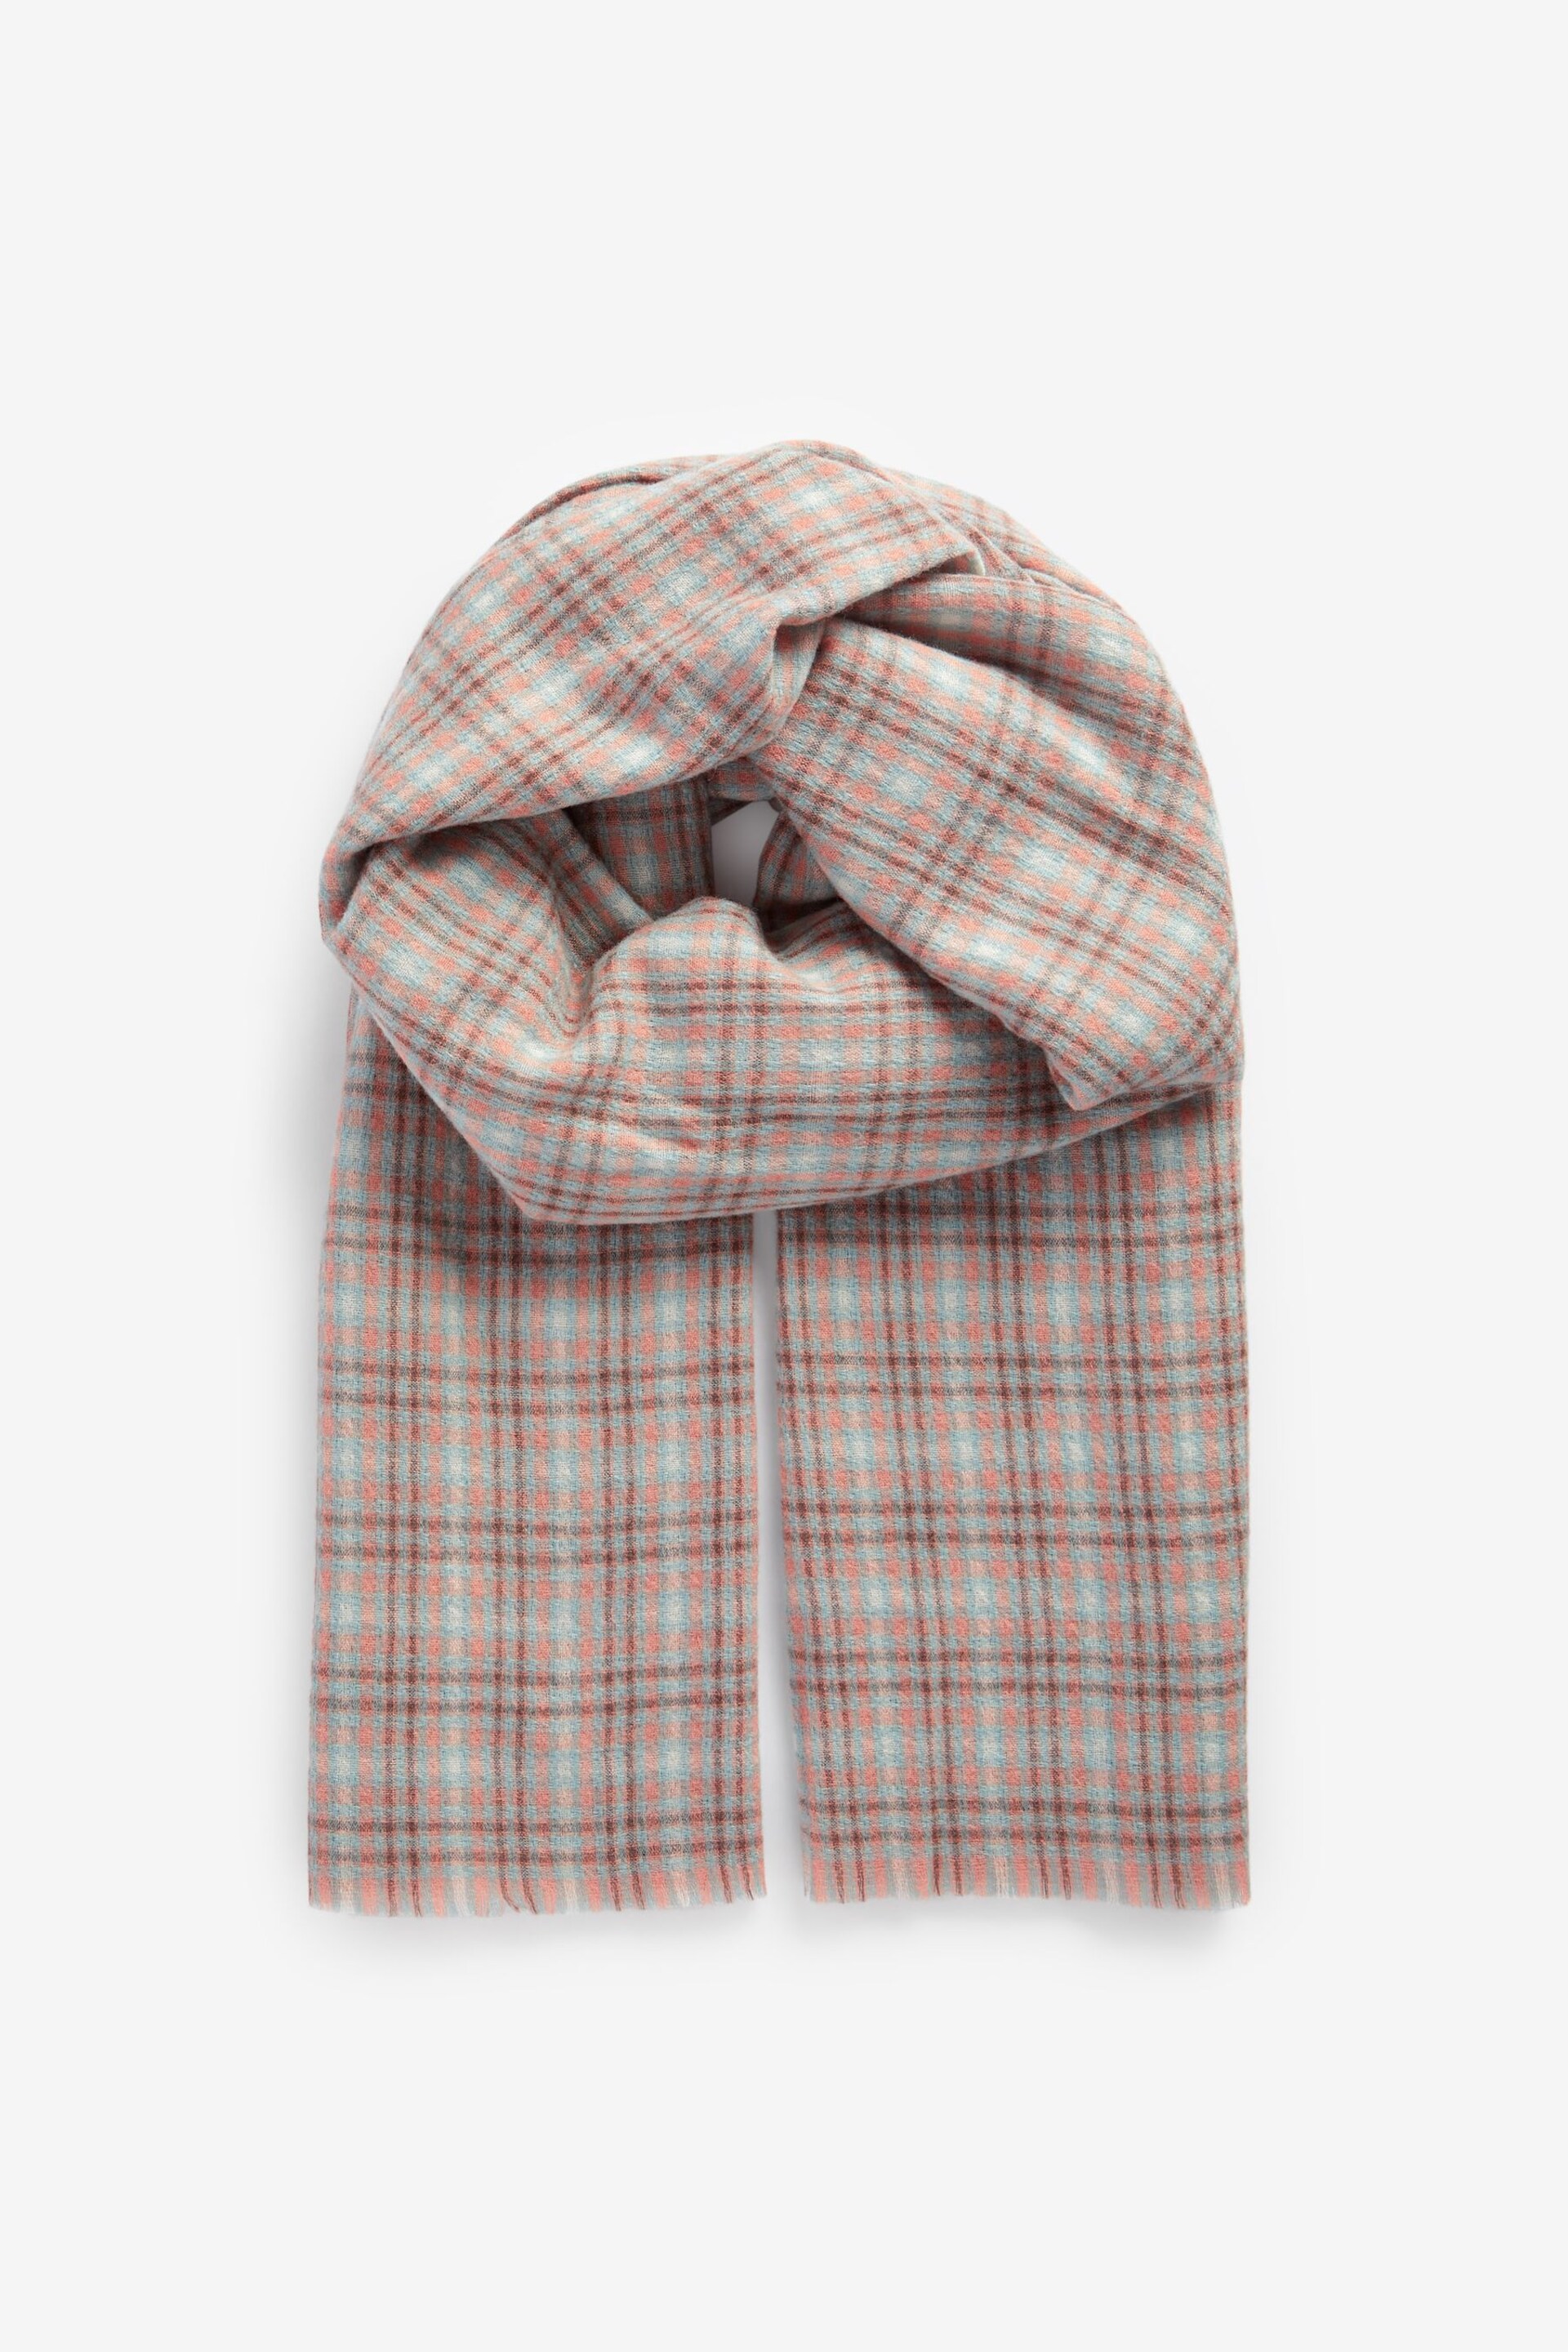 Blue/Neutral/Orange Mini Check Midweight Scarf - Image 6 of 8